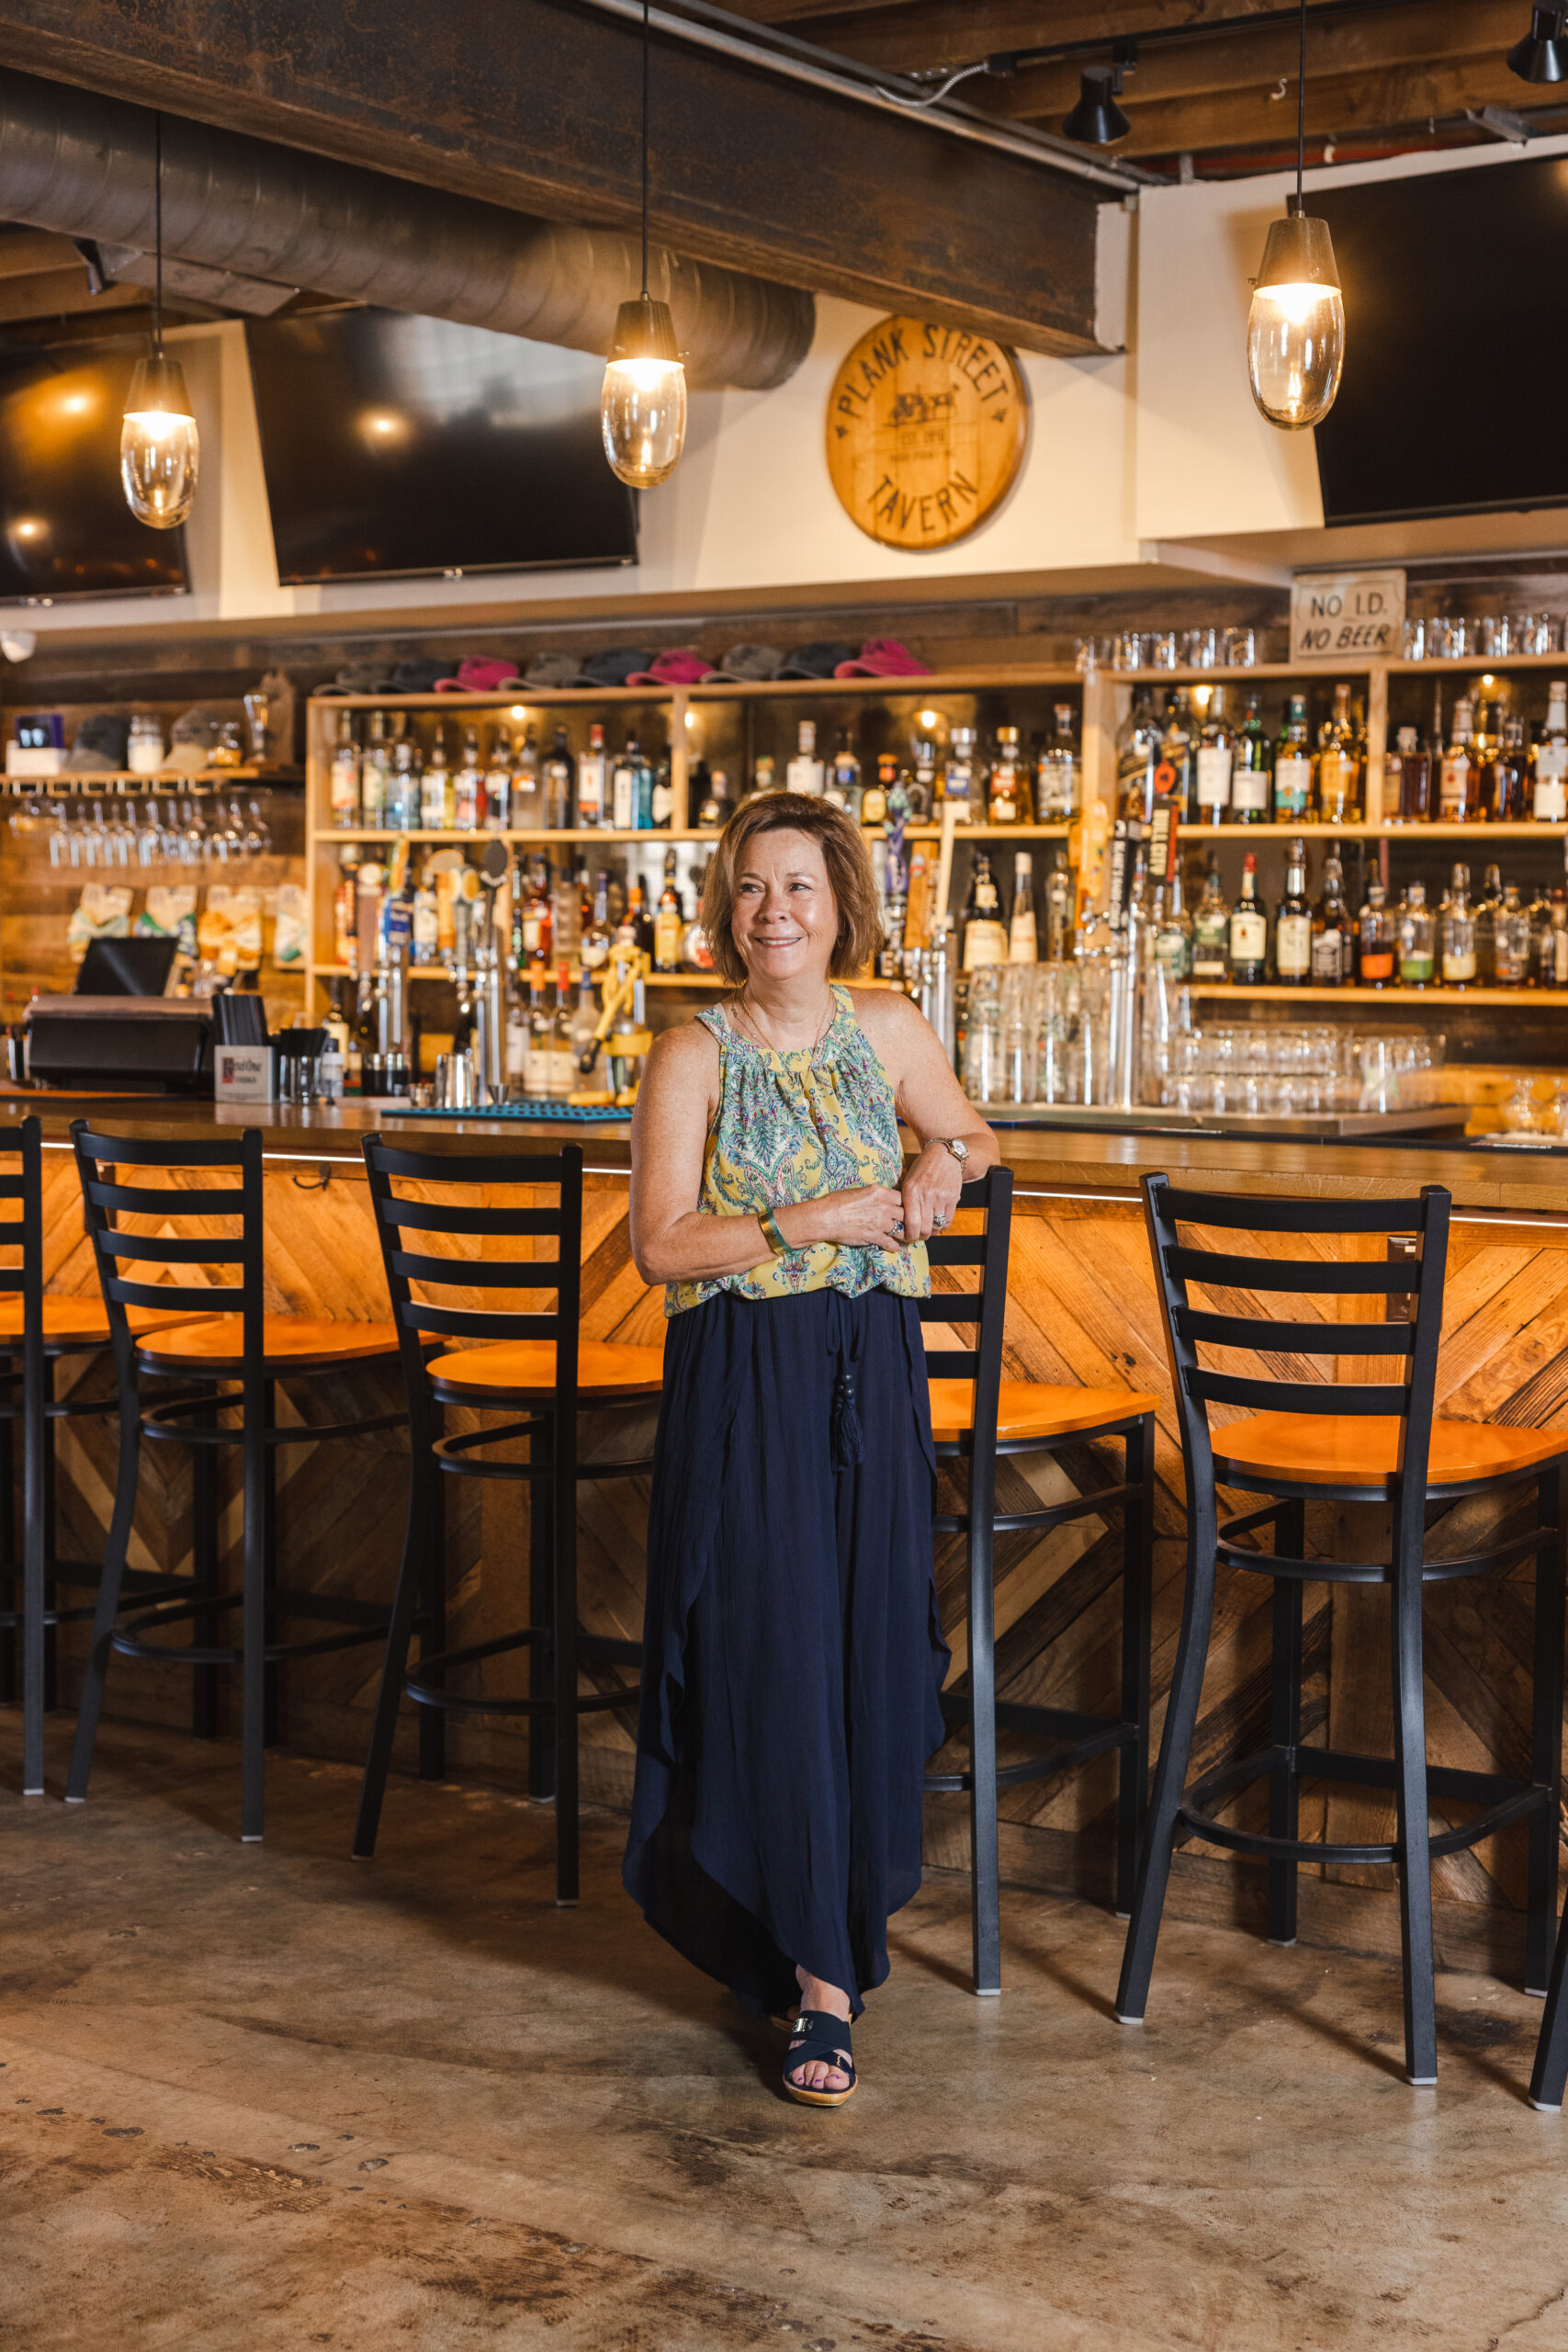 Pam Hubay, owner of Plank Street Tavern in High Point, NC.